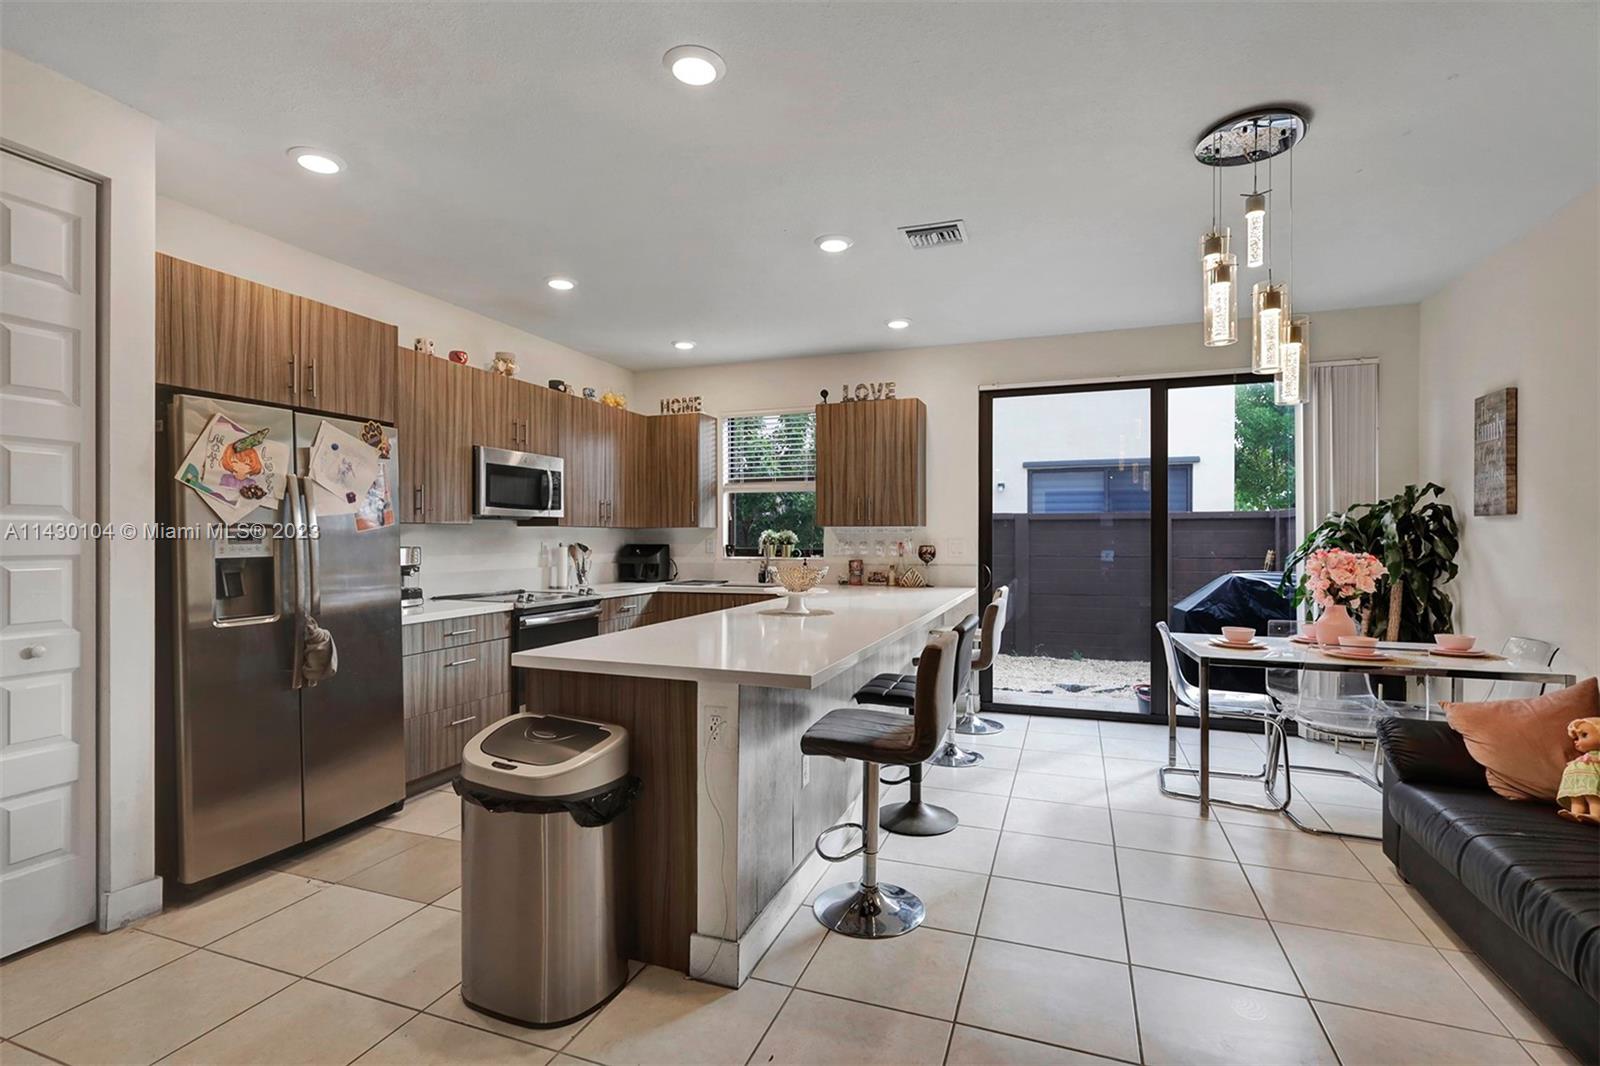 a kitchen with stainless steel appliances kitchen island granite countertop a sink a counter top space and stainless steel appliances